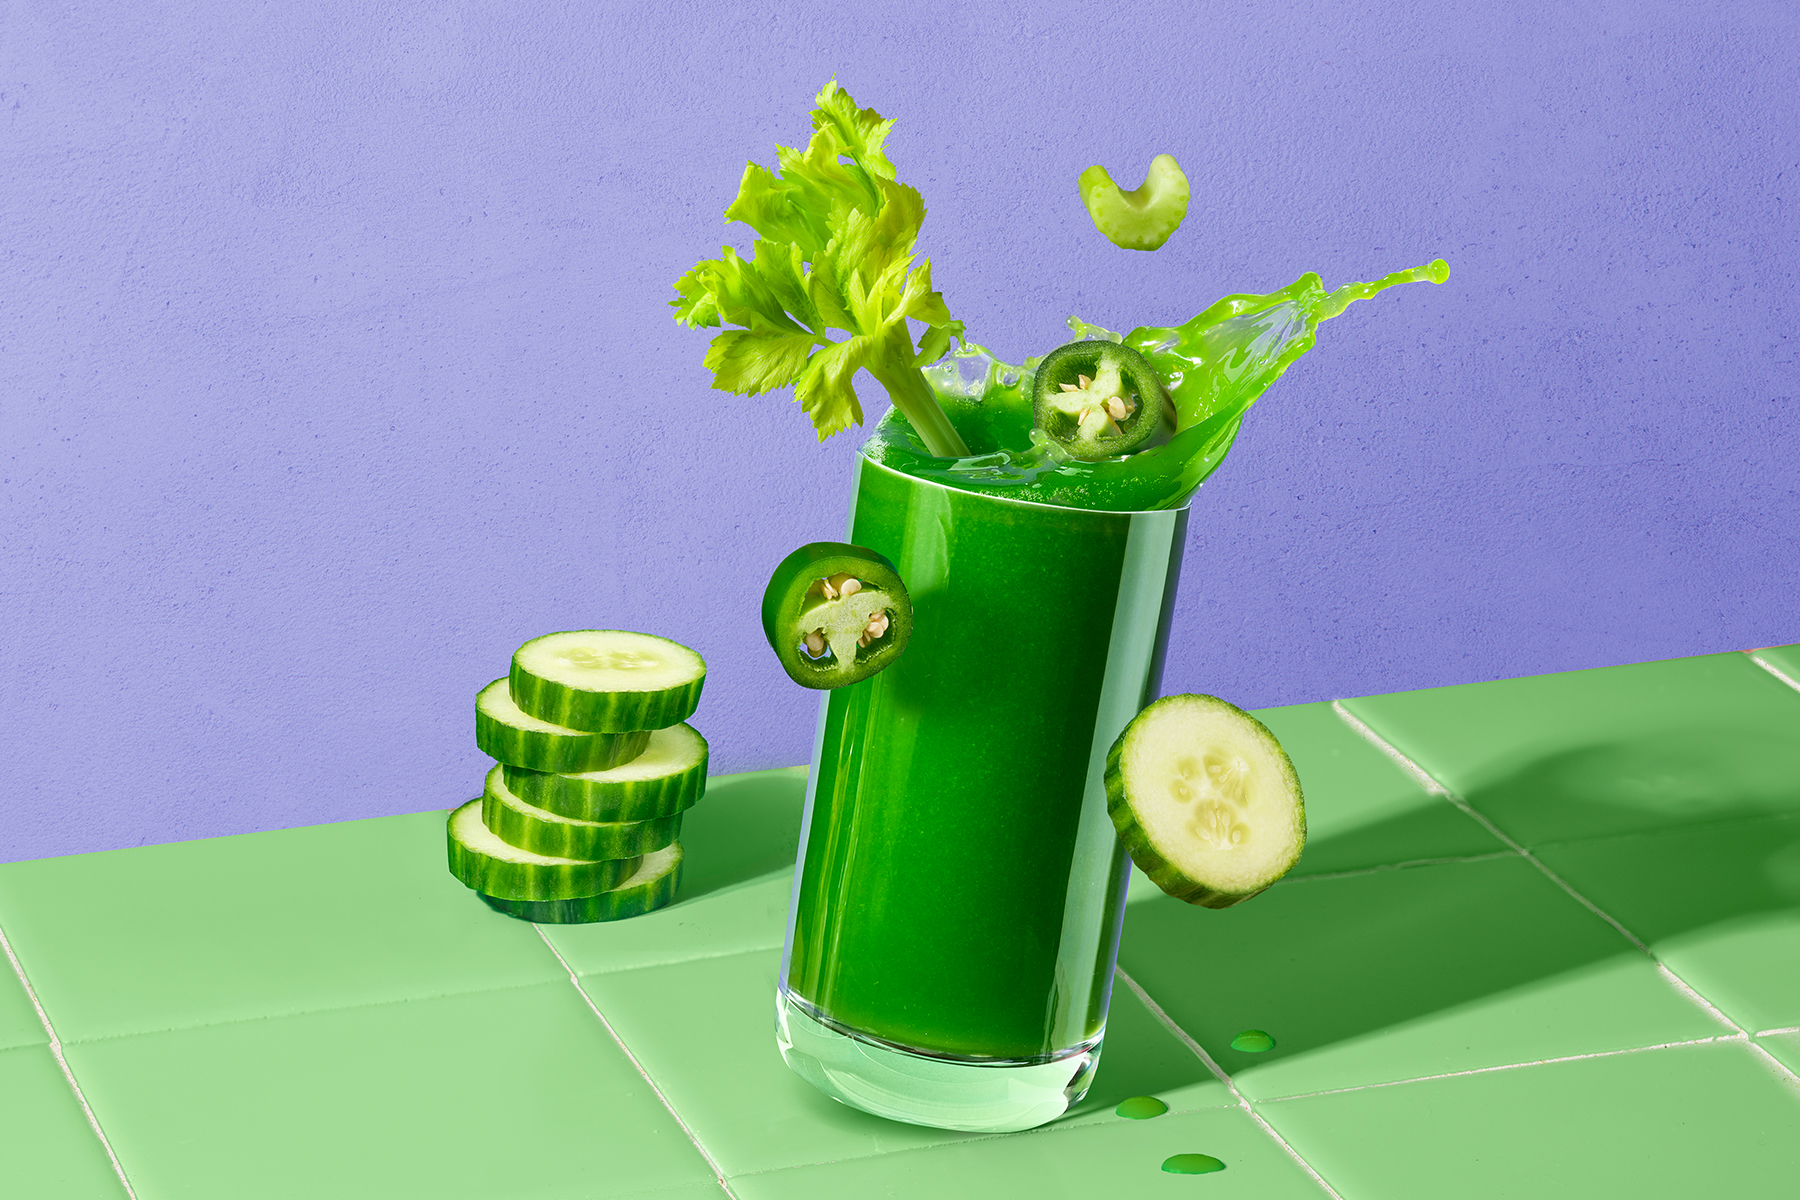 glass of celery cucumber jalapeno juice sitting on a green counter with slices of jalapeno, cucumber and celery splashing out in front of a purple background